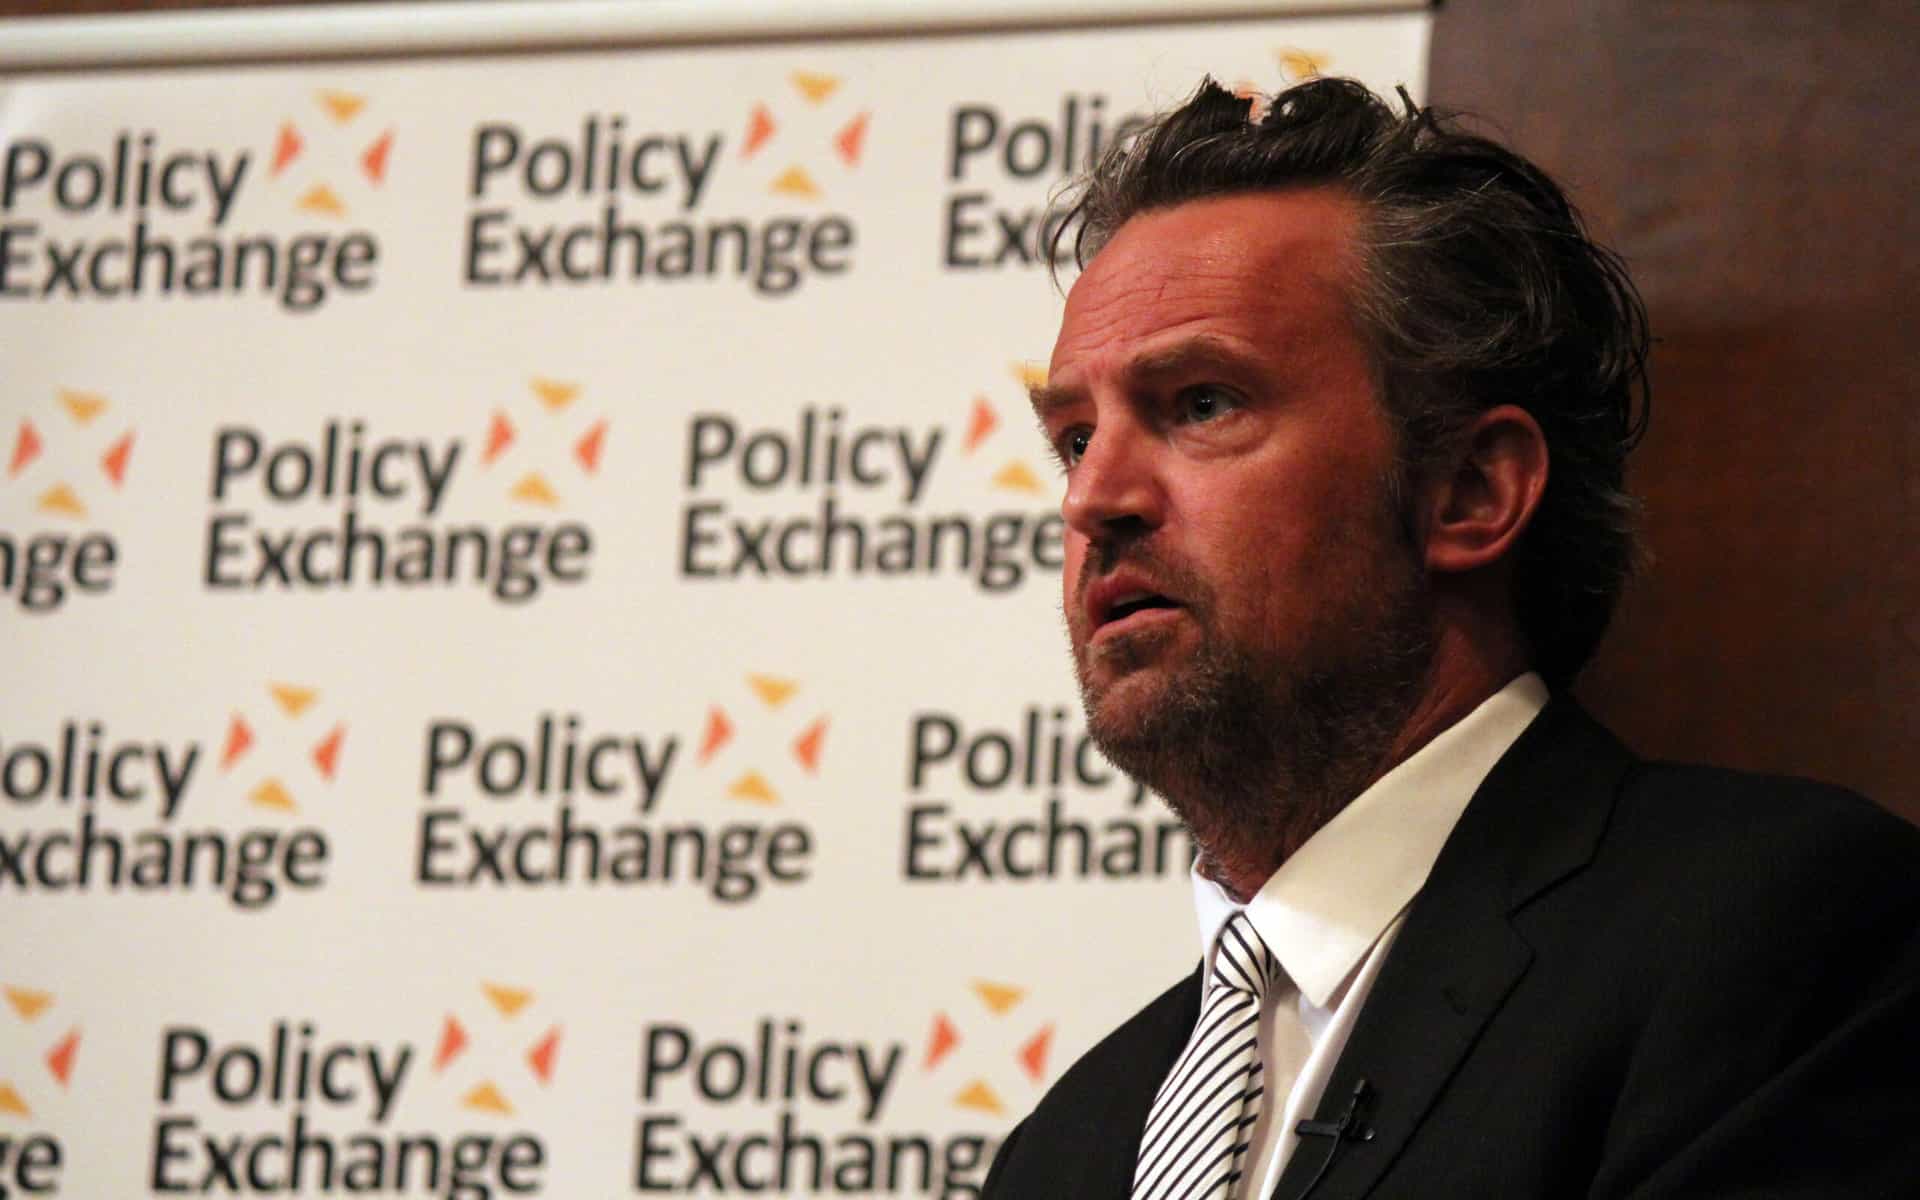 Matthew Perry, in a suit and tie, stands in profile view in front of a branded background